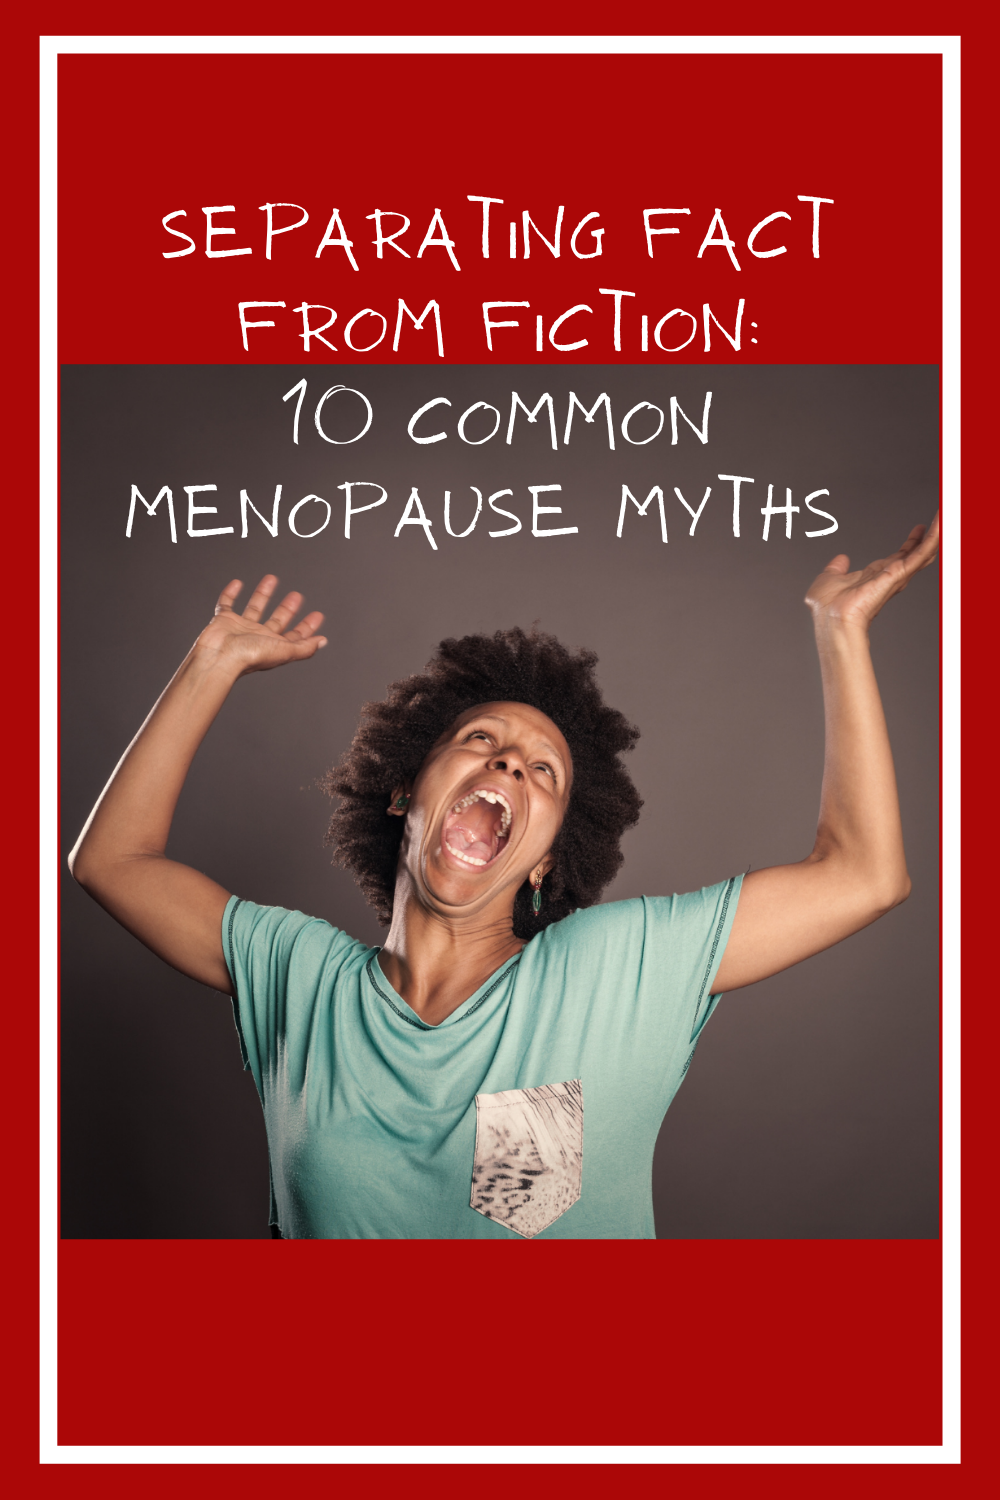 Separating Fact from Fiction: 10 Common Menopause Myths